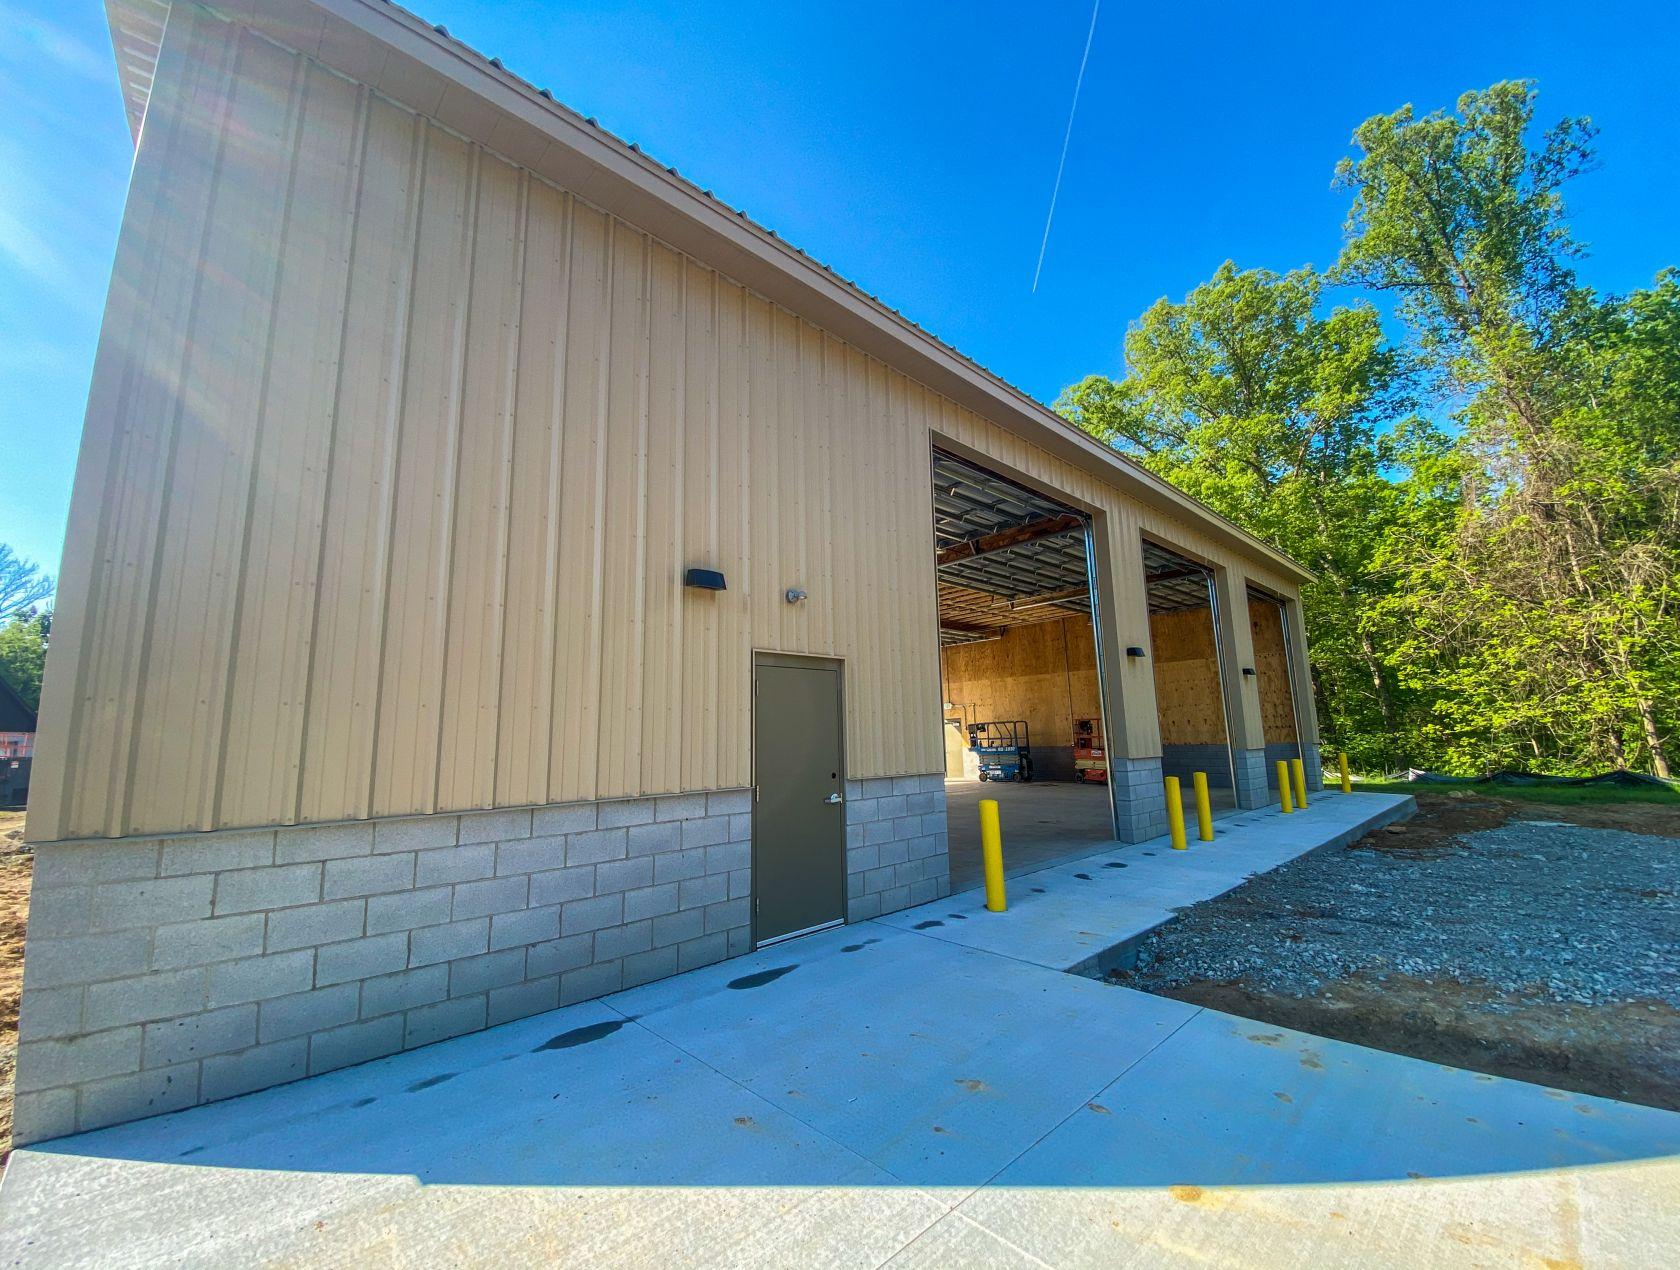 ODNR Division of Forestry Headquarters - Storage building exterior 2